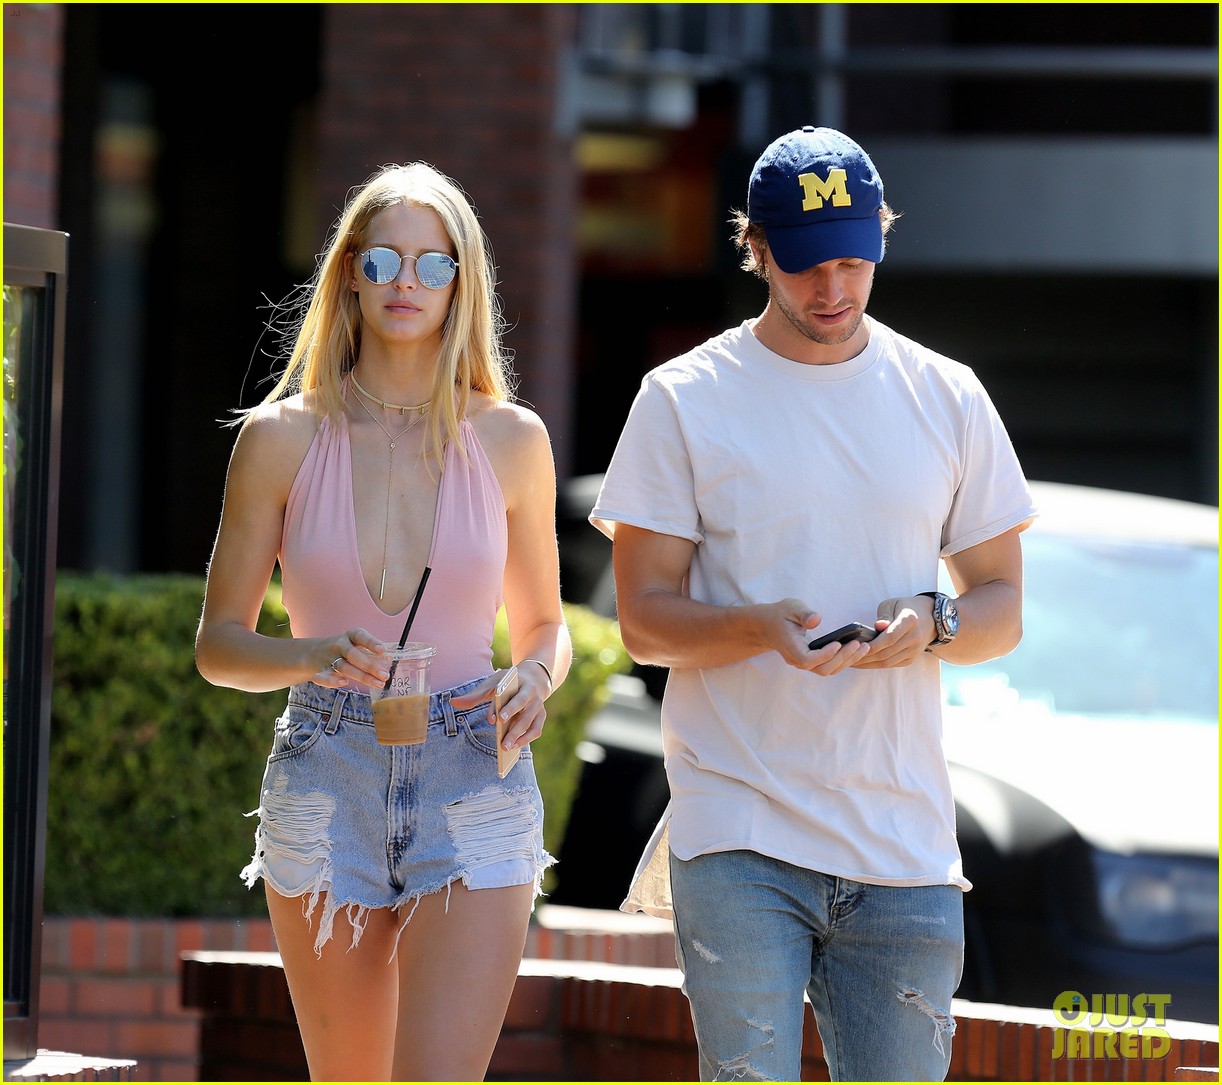 patrick schwarzenegger abby champion grab afternoon snacks brentwood 01